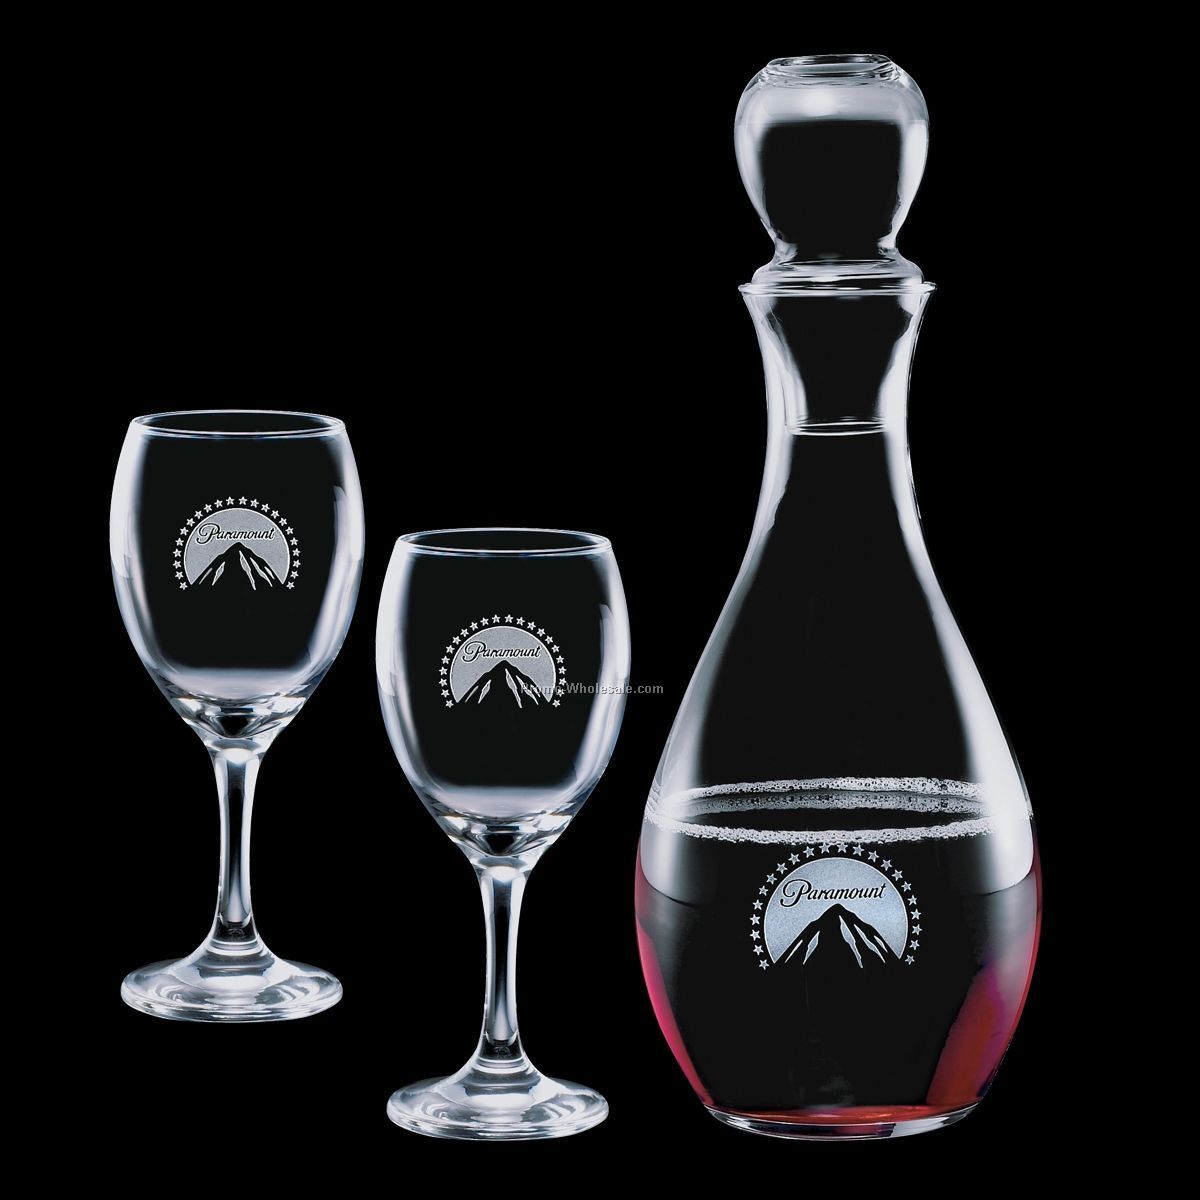 33 Oz. Carberry Decanter And 2 Wine Glasses